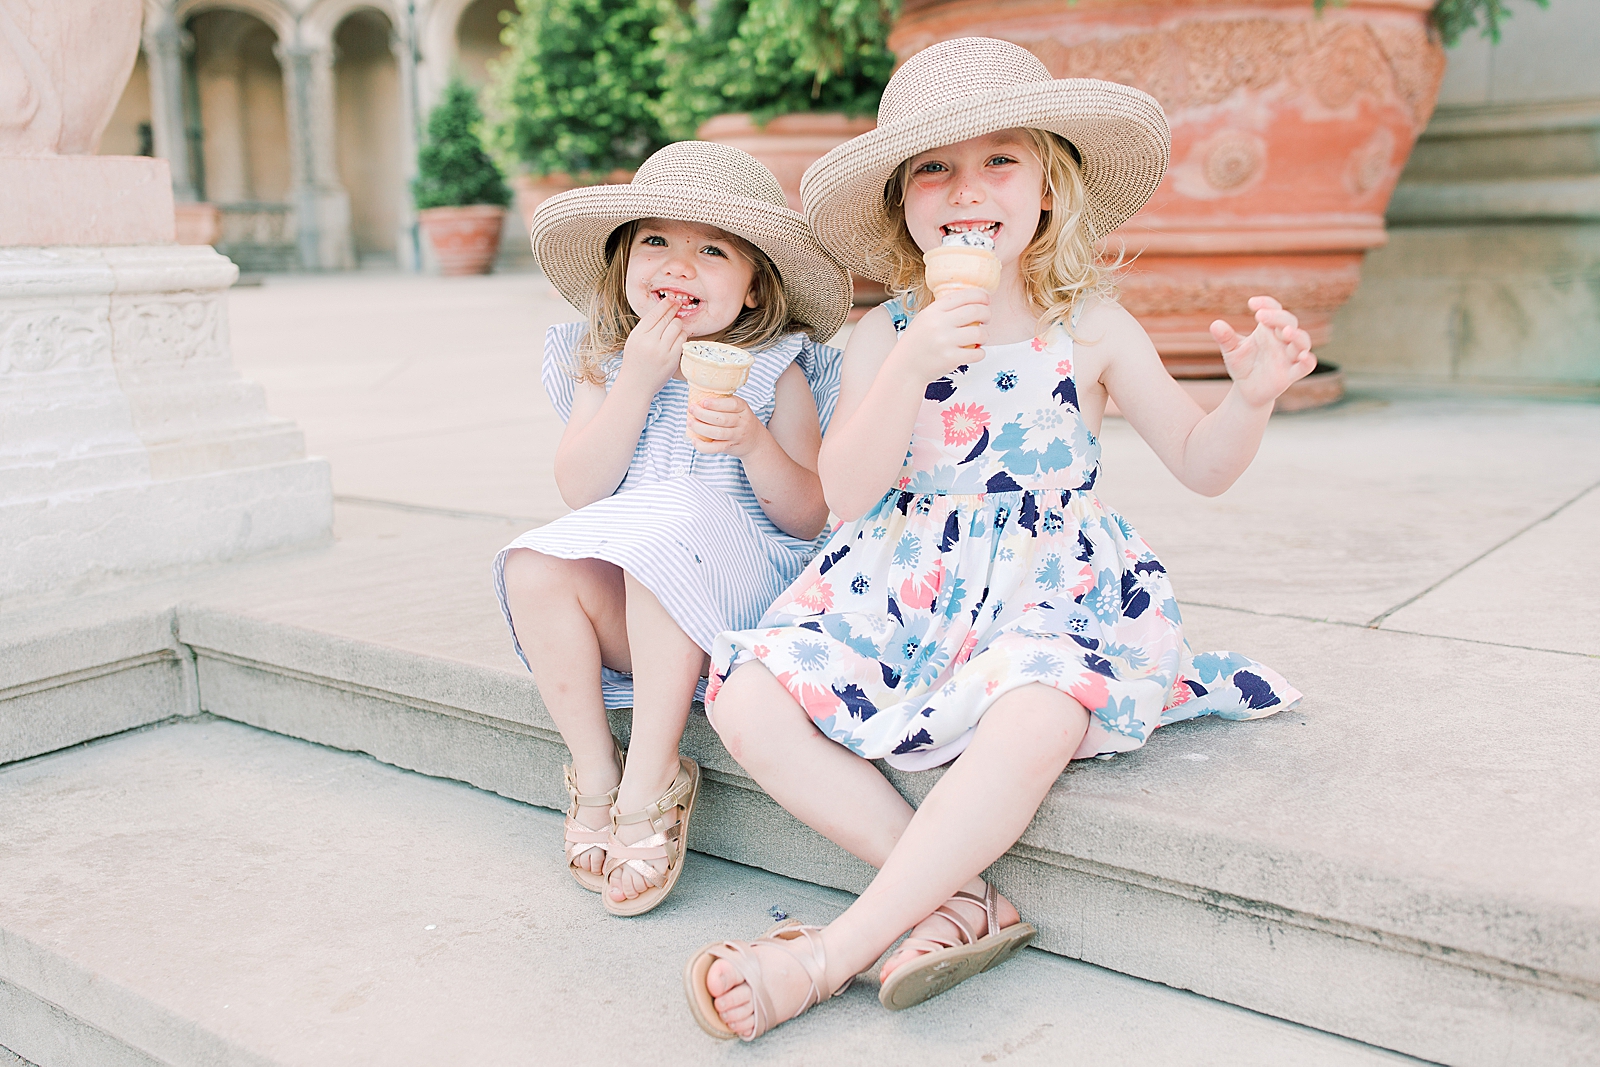 Biltmore House and Gardens sisters eating ice cream smiling Photo